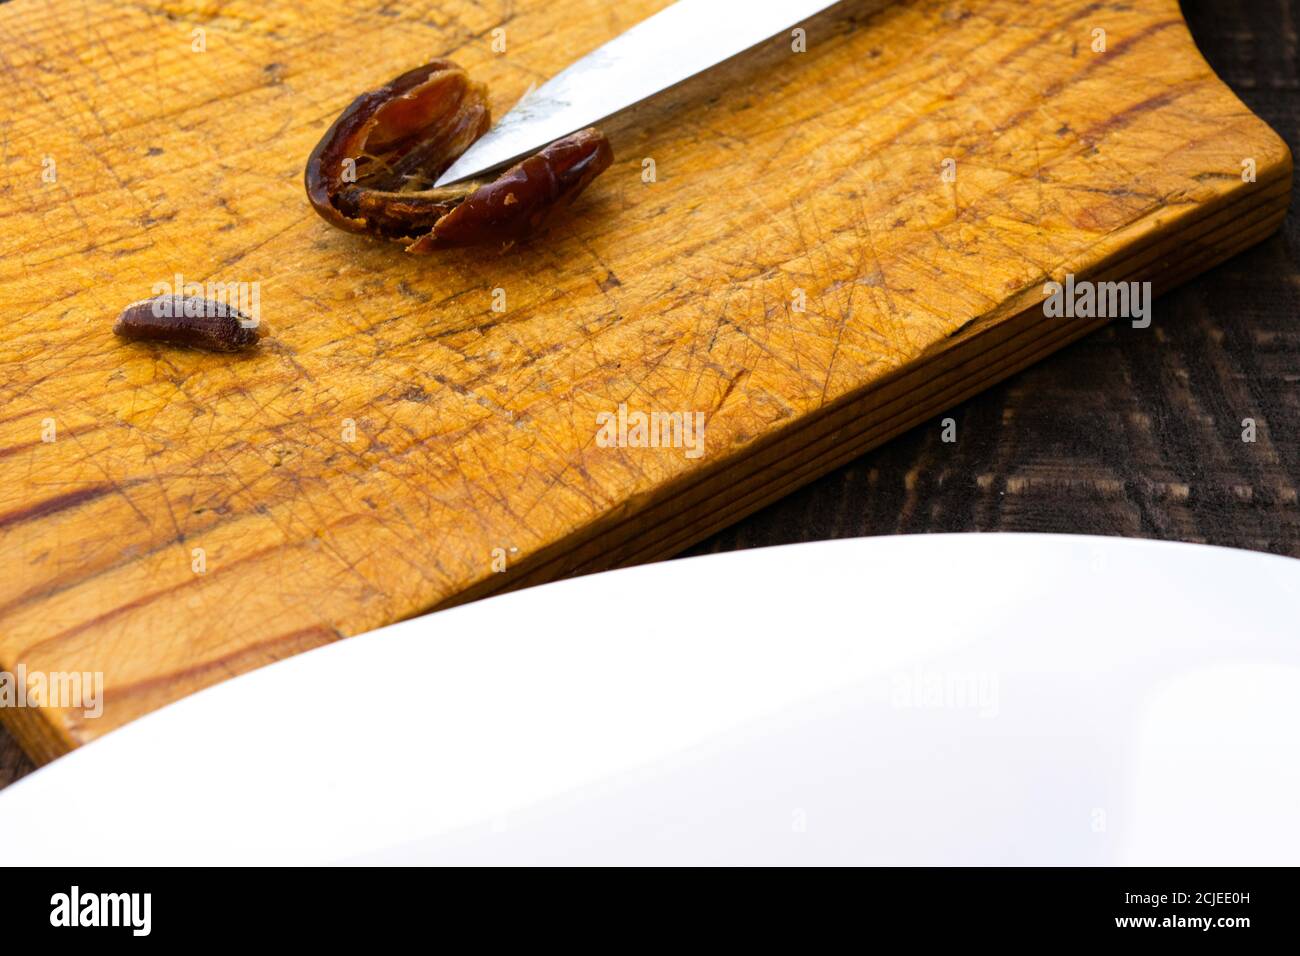 Hushaf - date milk, a traditional dish of Ramadan, cooking, ingredients, cut pitted dates, a knife and a date stone lie on a cutting board, there is t Stock Photo